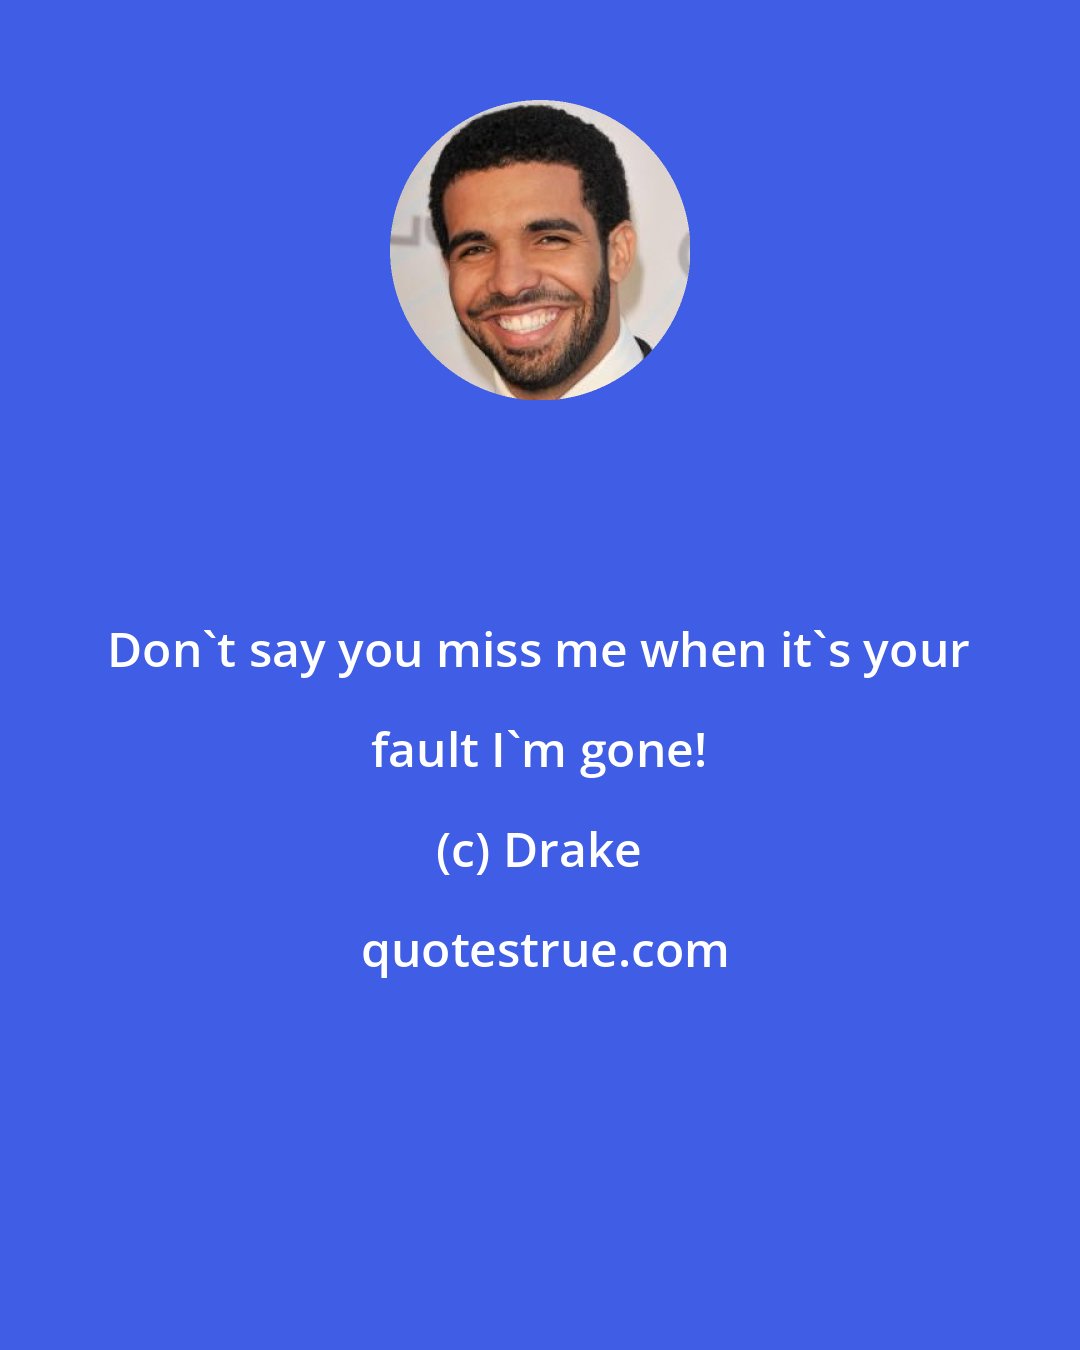 Drake: Don't say you miss me when it's your fault I'm gone!